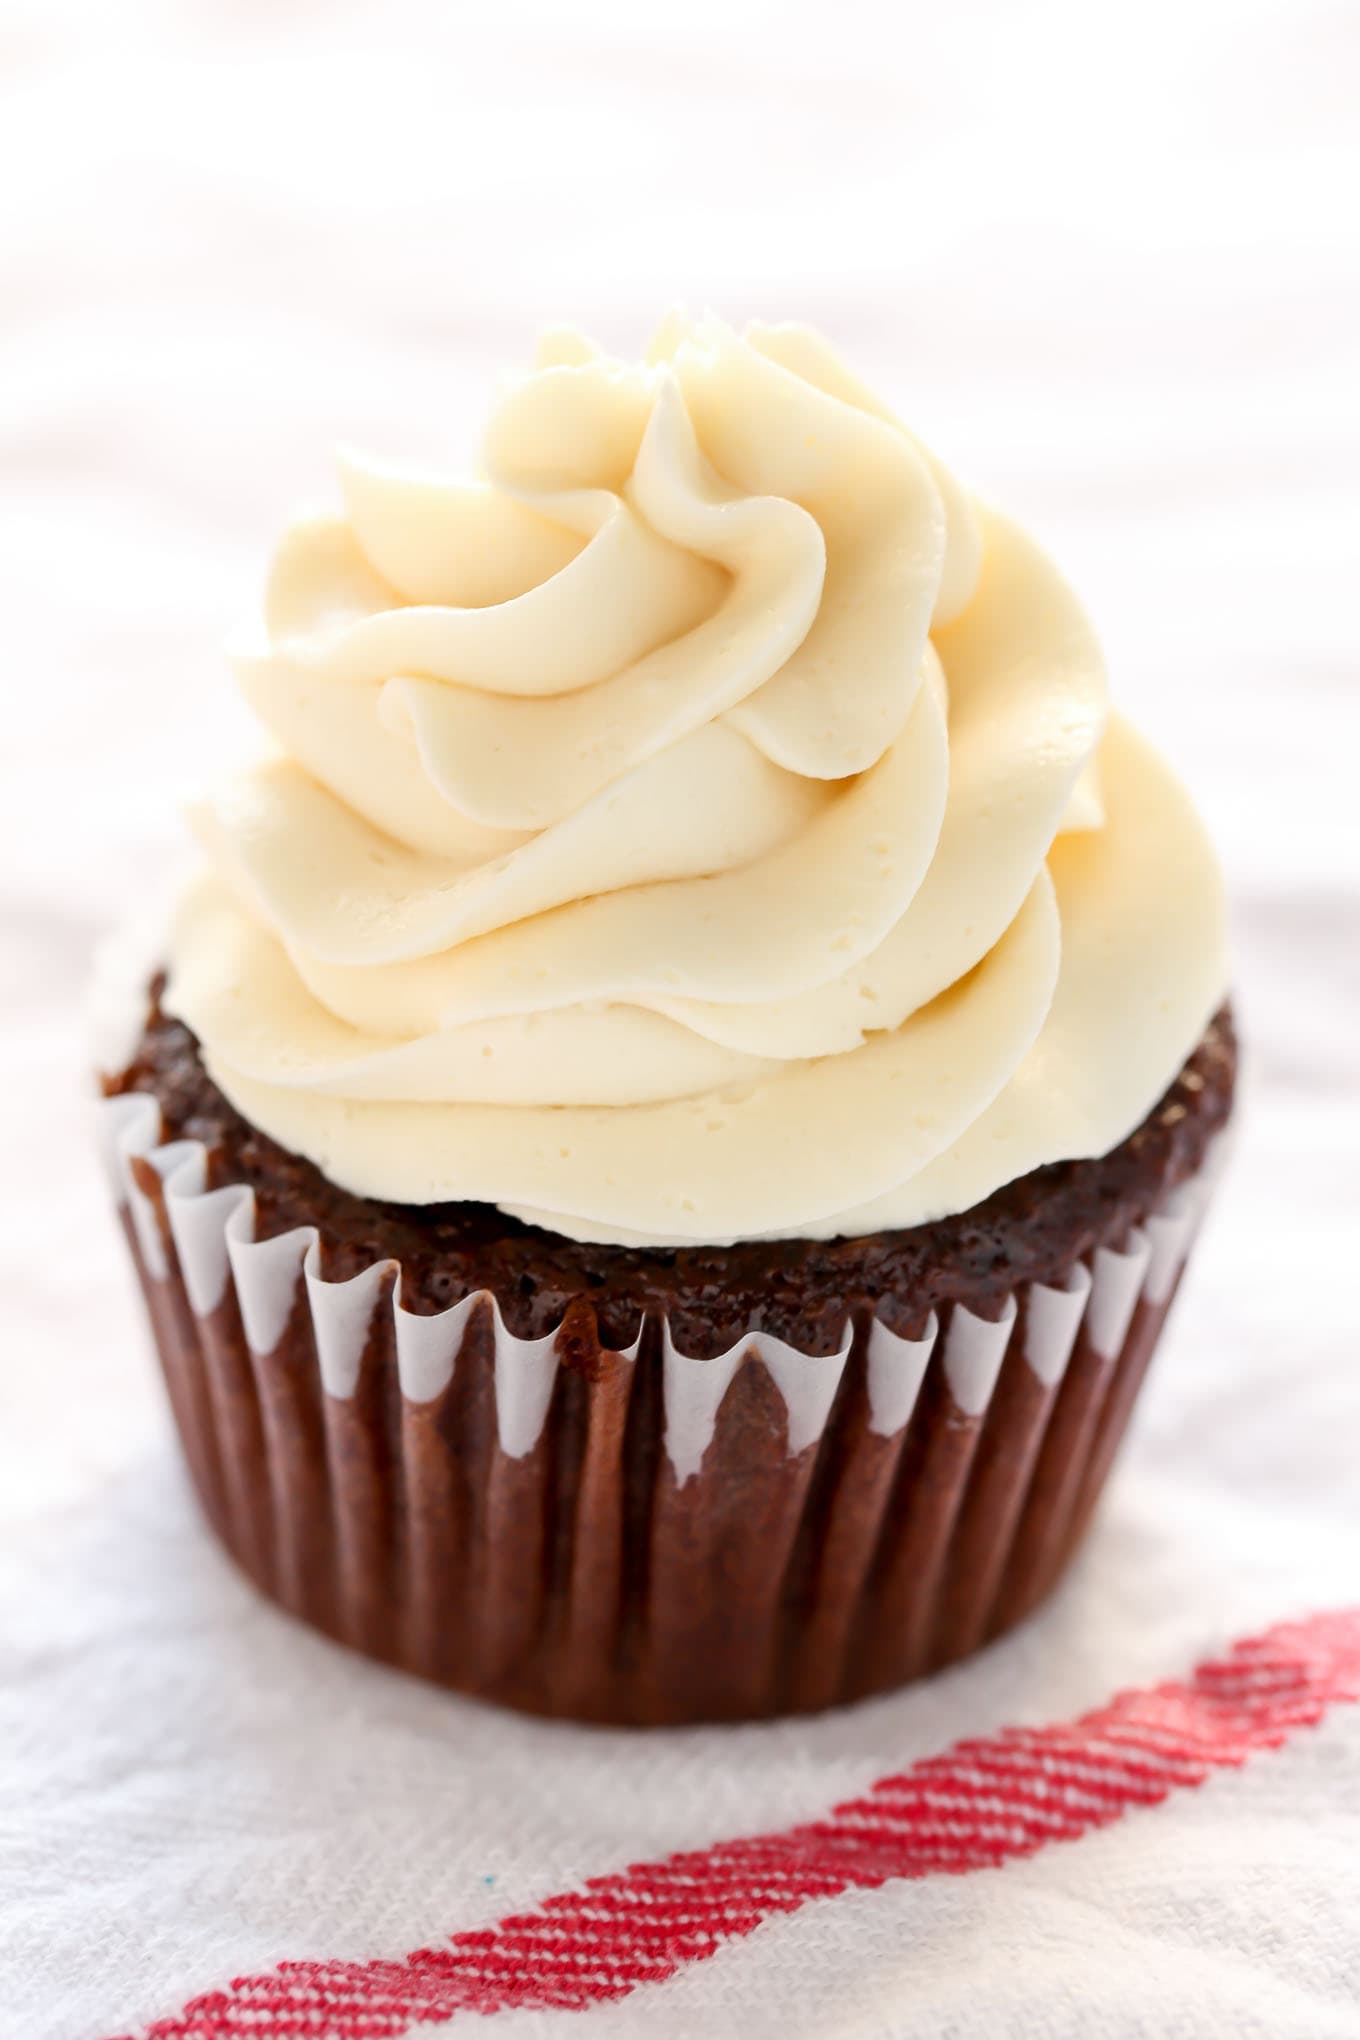 How To Make Buttercream Frosting